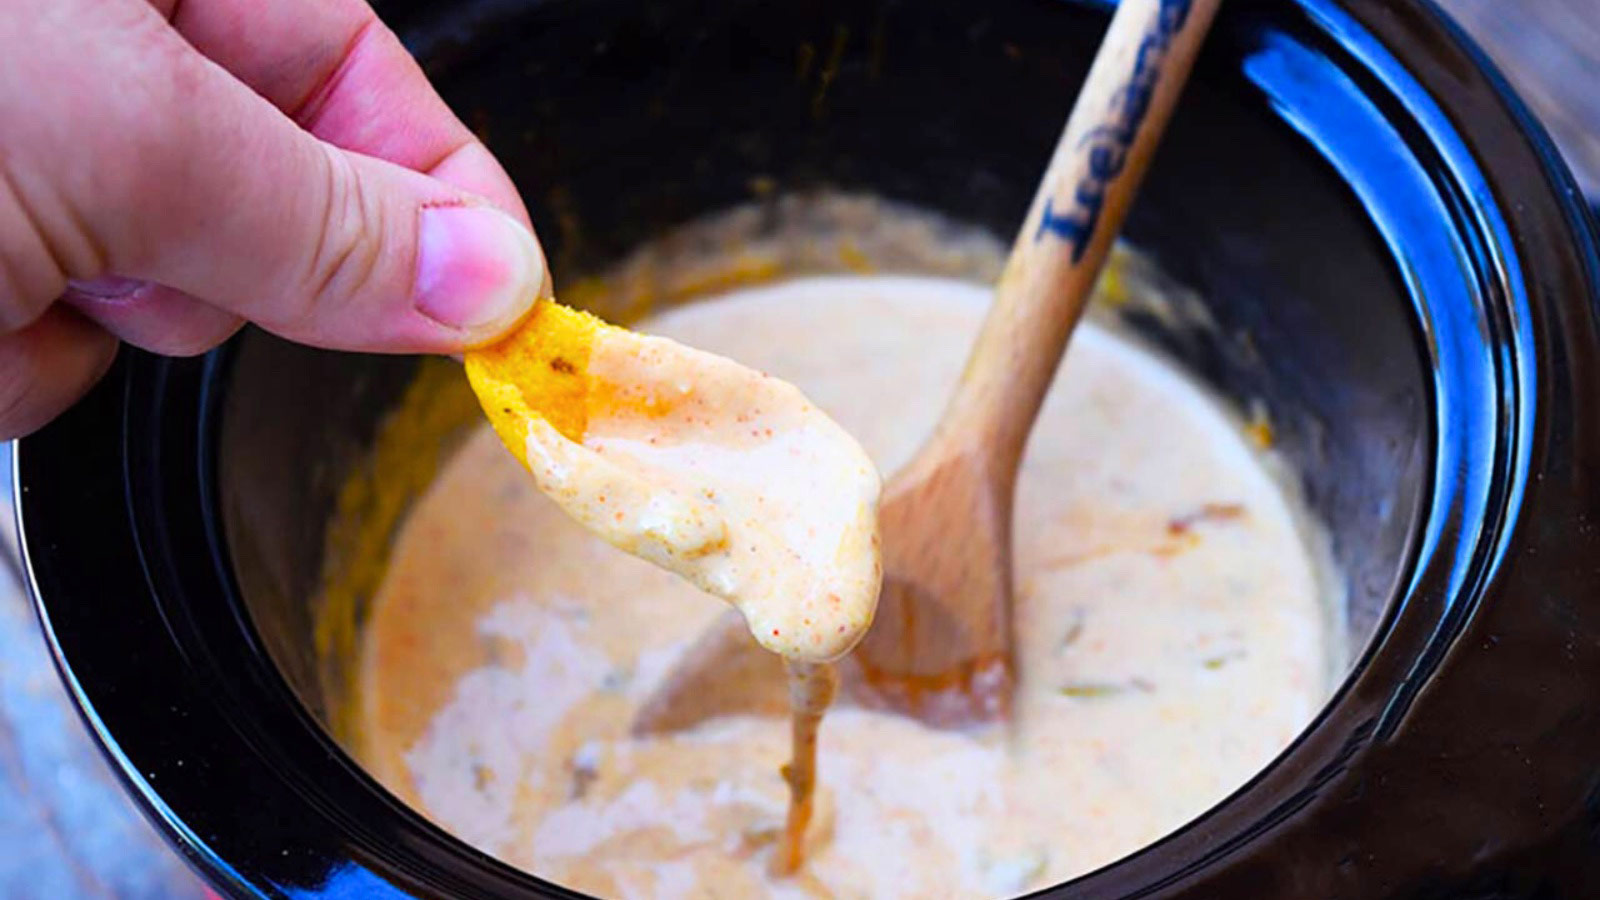 A hand dips a corn chip into homemade queso.